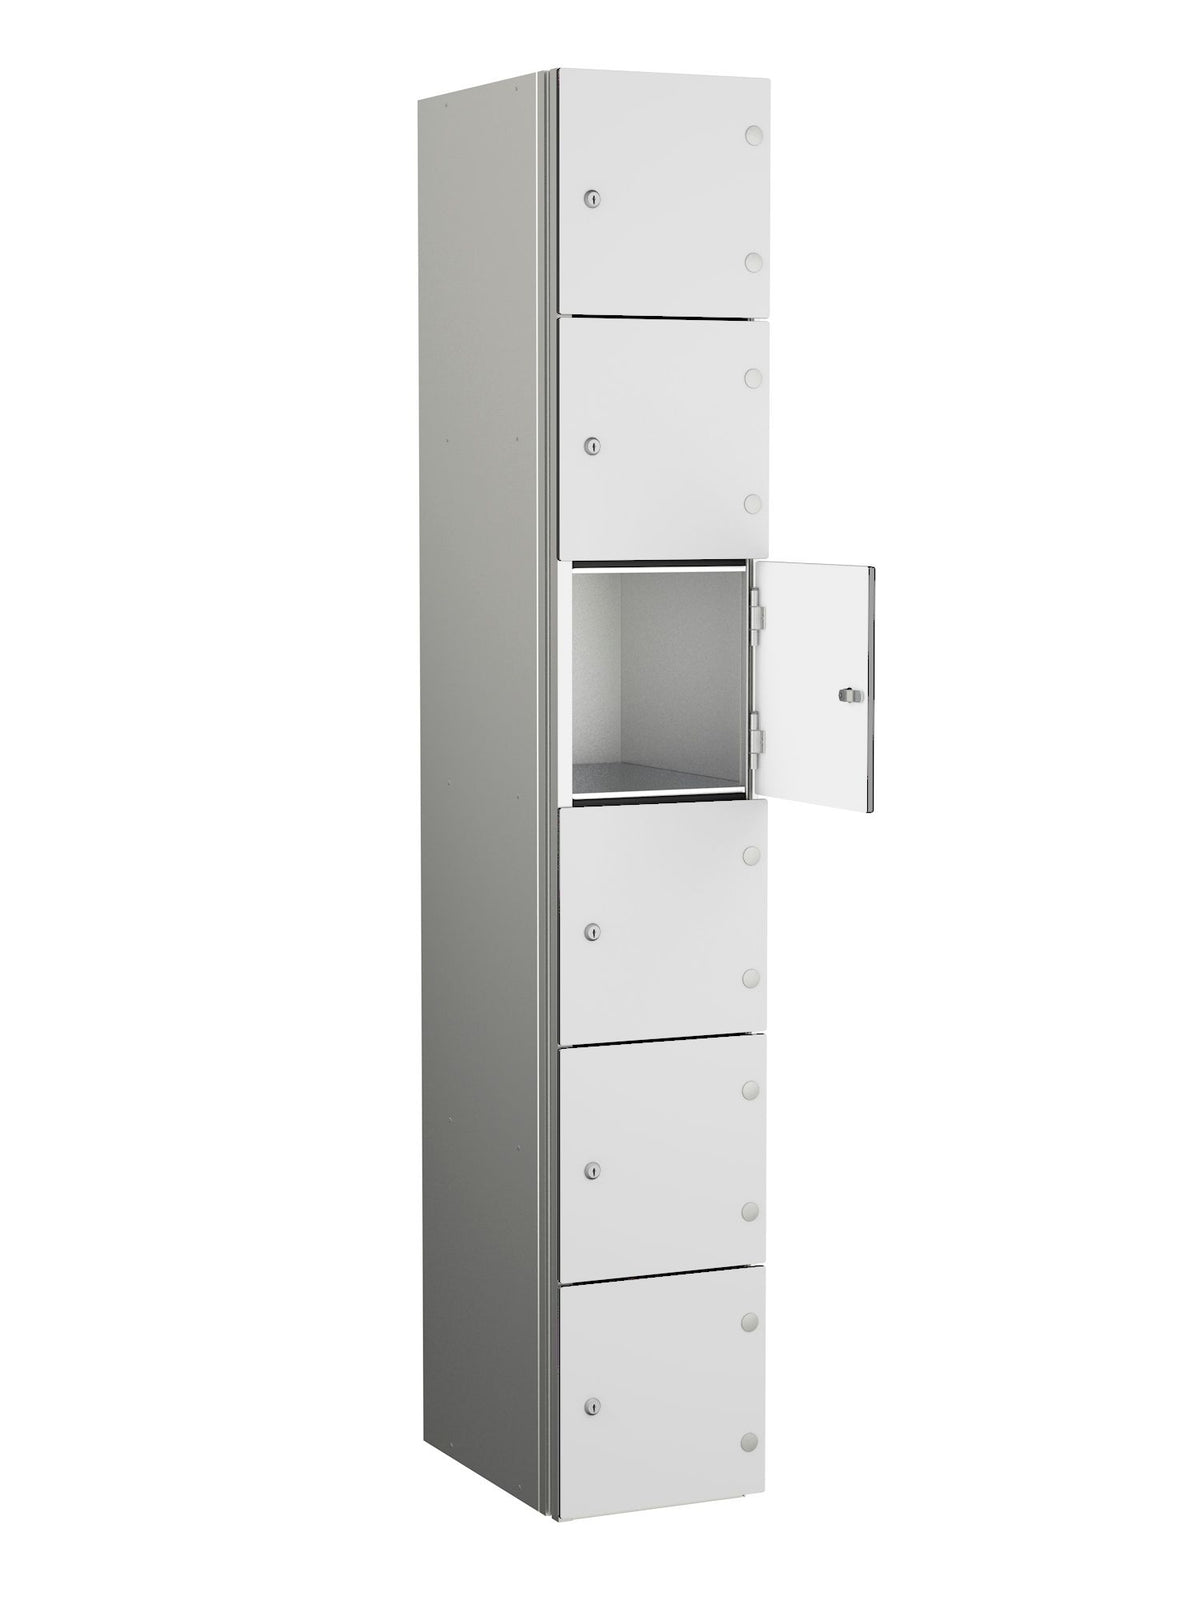 ZENBOX WET AREA LOCKERS WITH SGL DOORS - PEARLY WHITE 6 DOOR Storage Lockers > Lockers > Cabinets > Storage > Probe > One Stop For Safety   